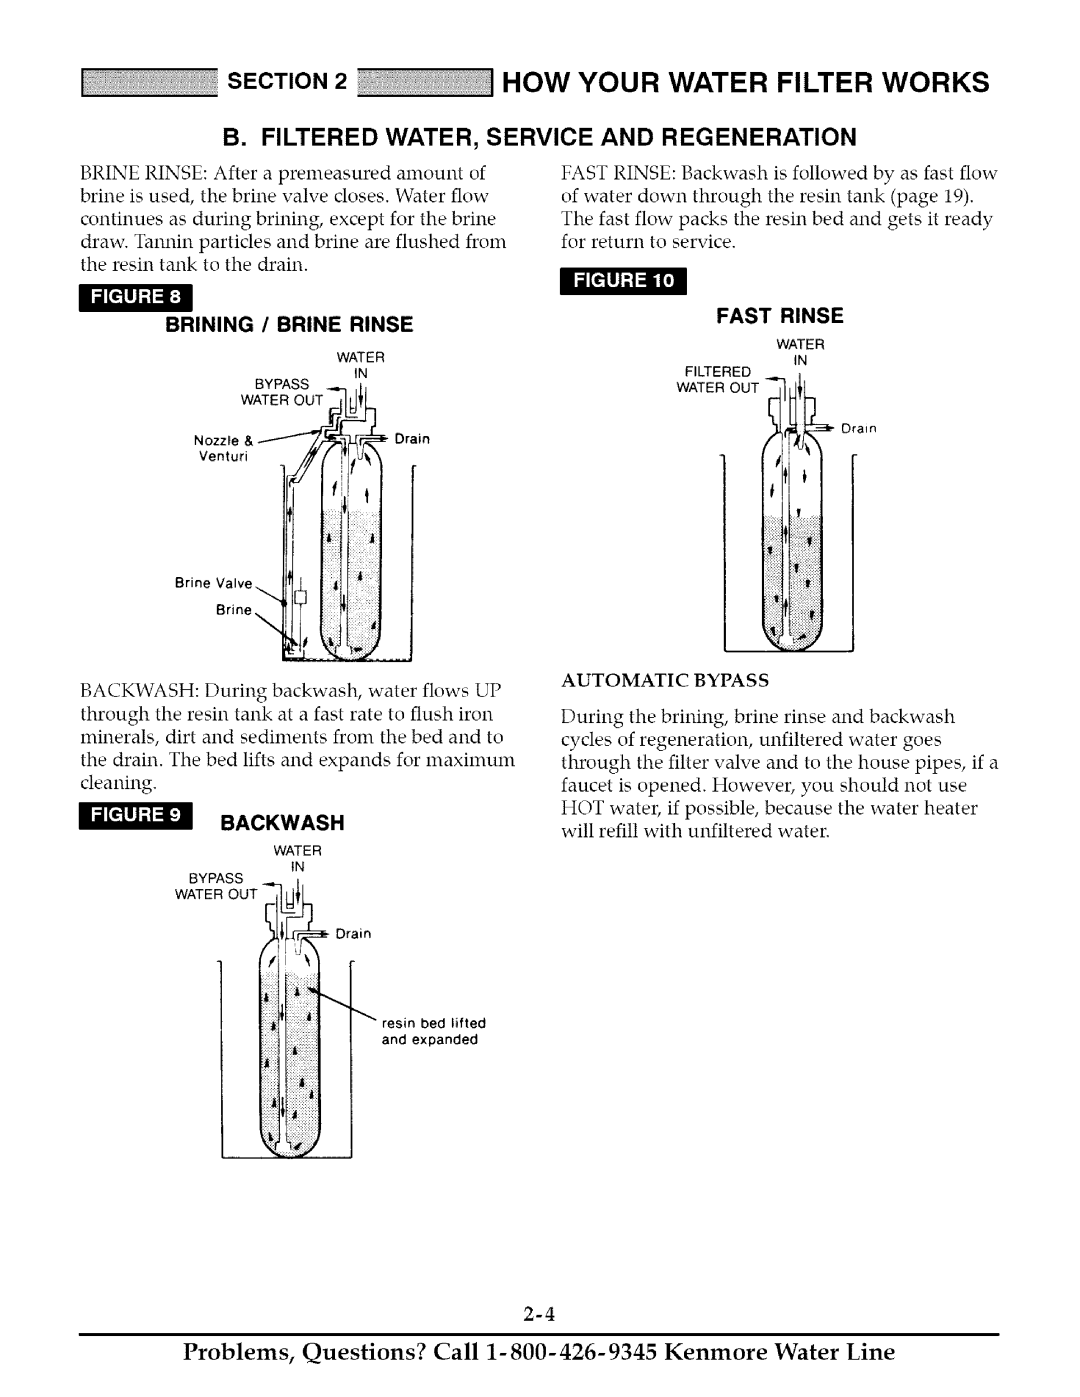 Kenmore 625.348261 How Your Water Filter Works, B. Filtered Water, Service And Regeneration, Brining / Brine Rinse 